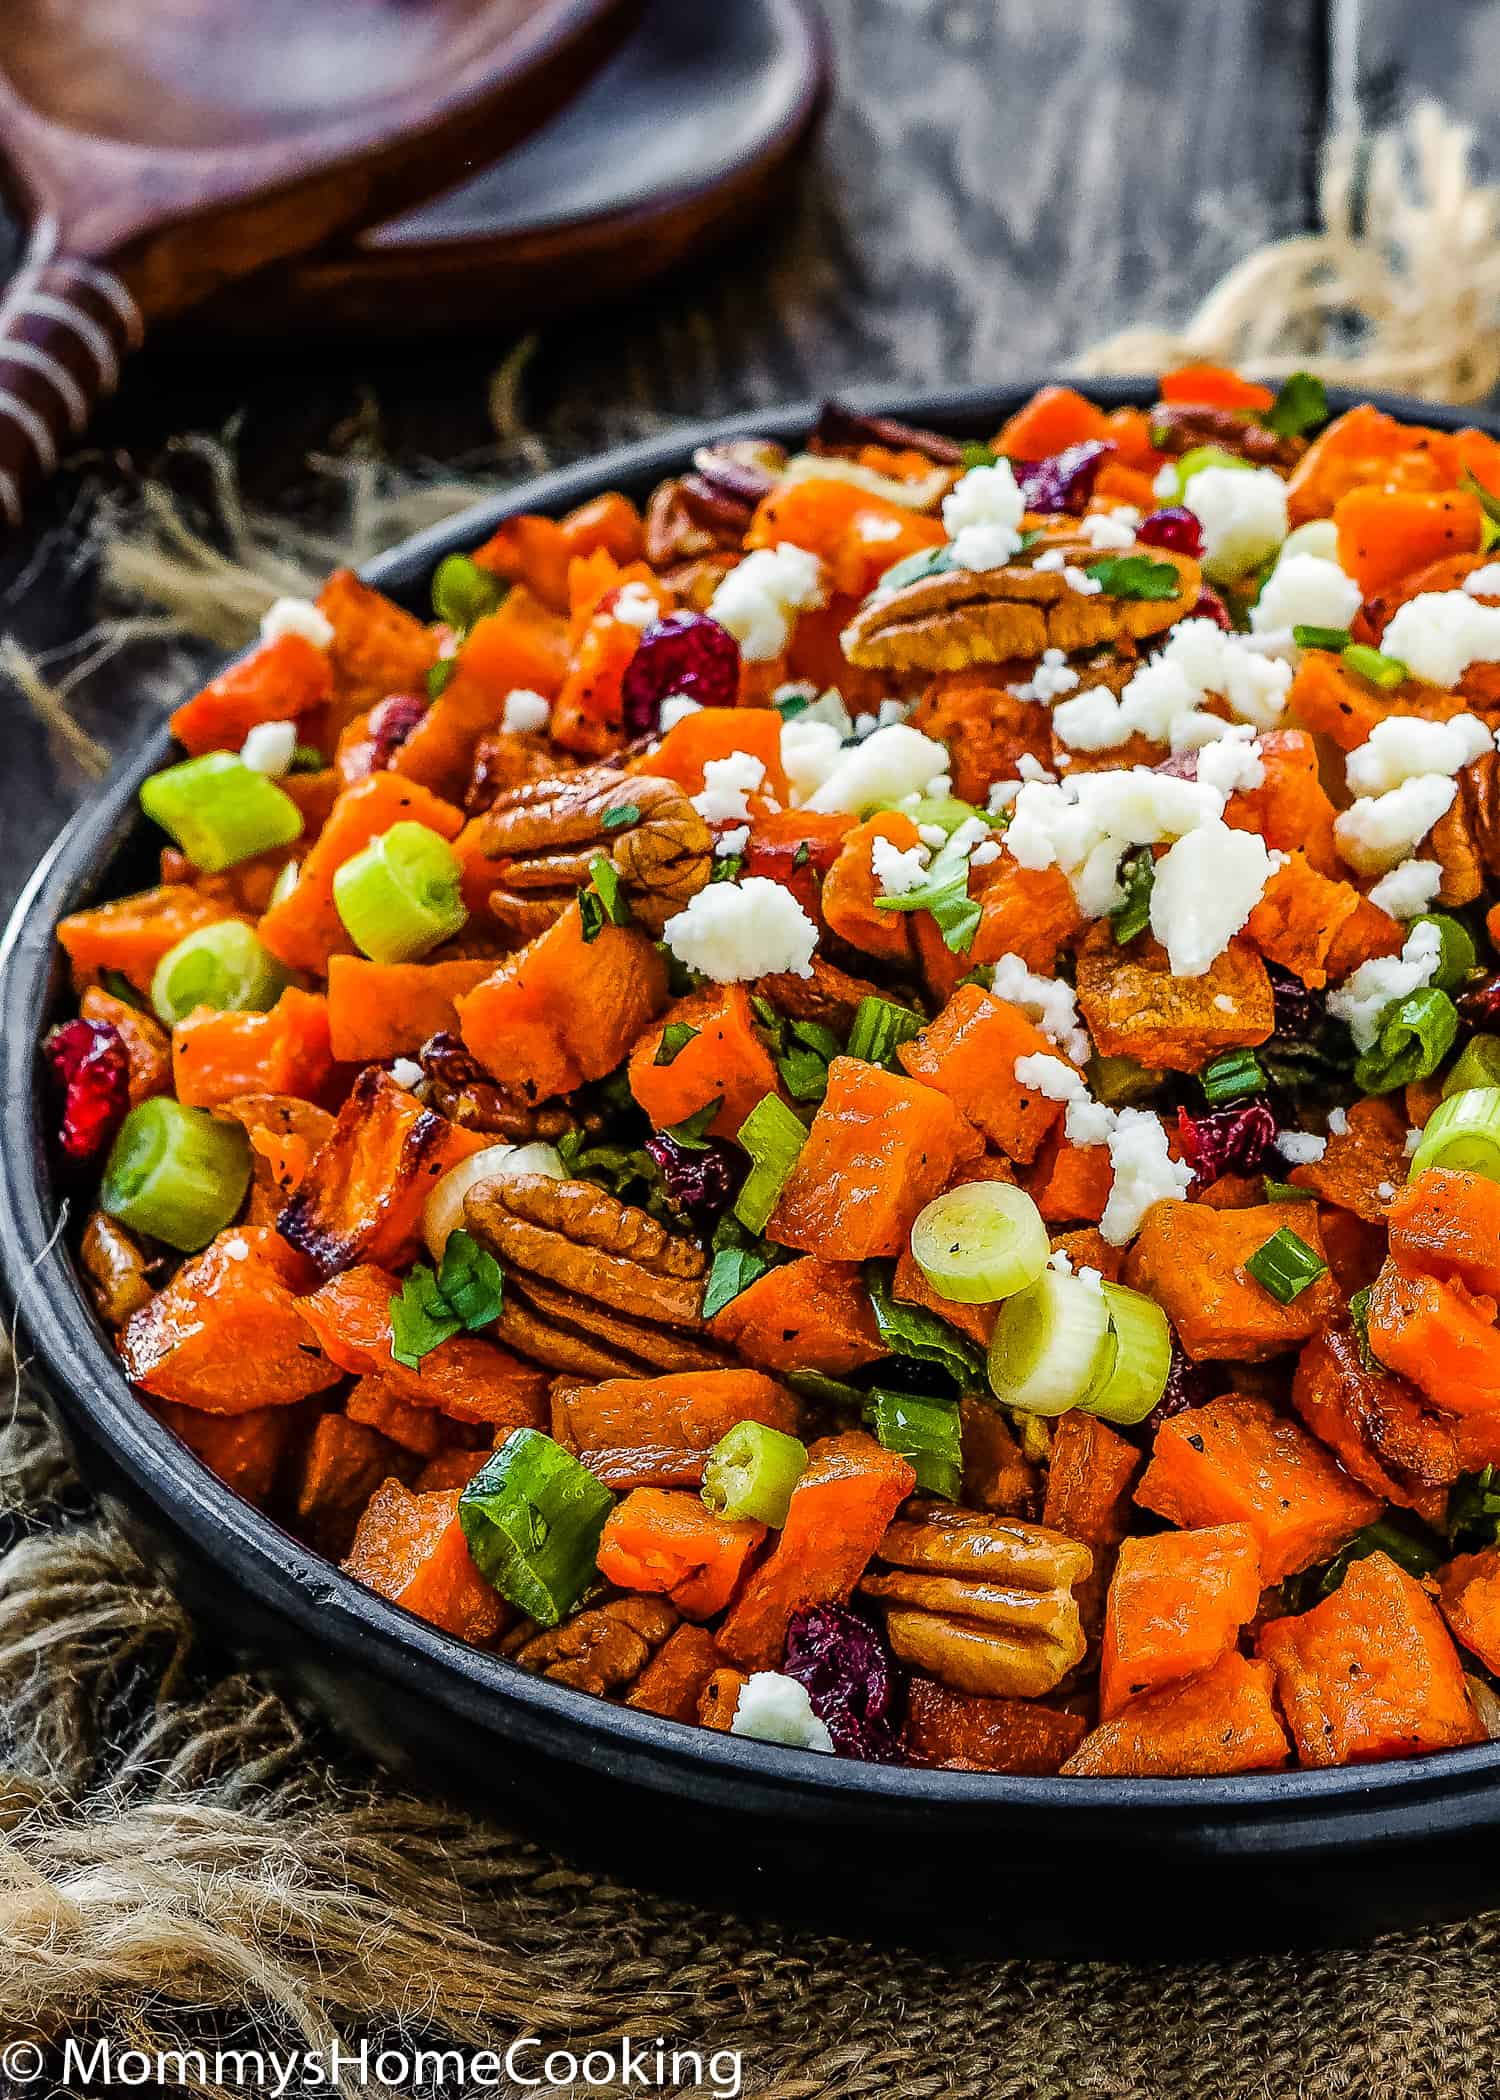 Roasted Sweet Potato and Cranberry Salad in a black serving bowl over a wooden surface and two serving spoons on the background.